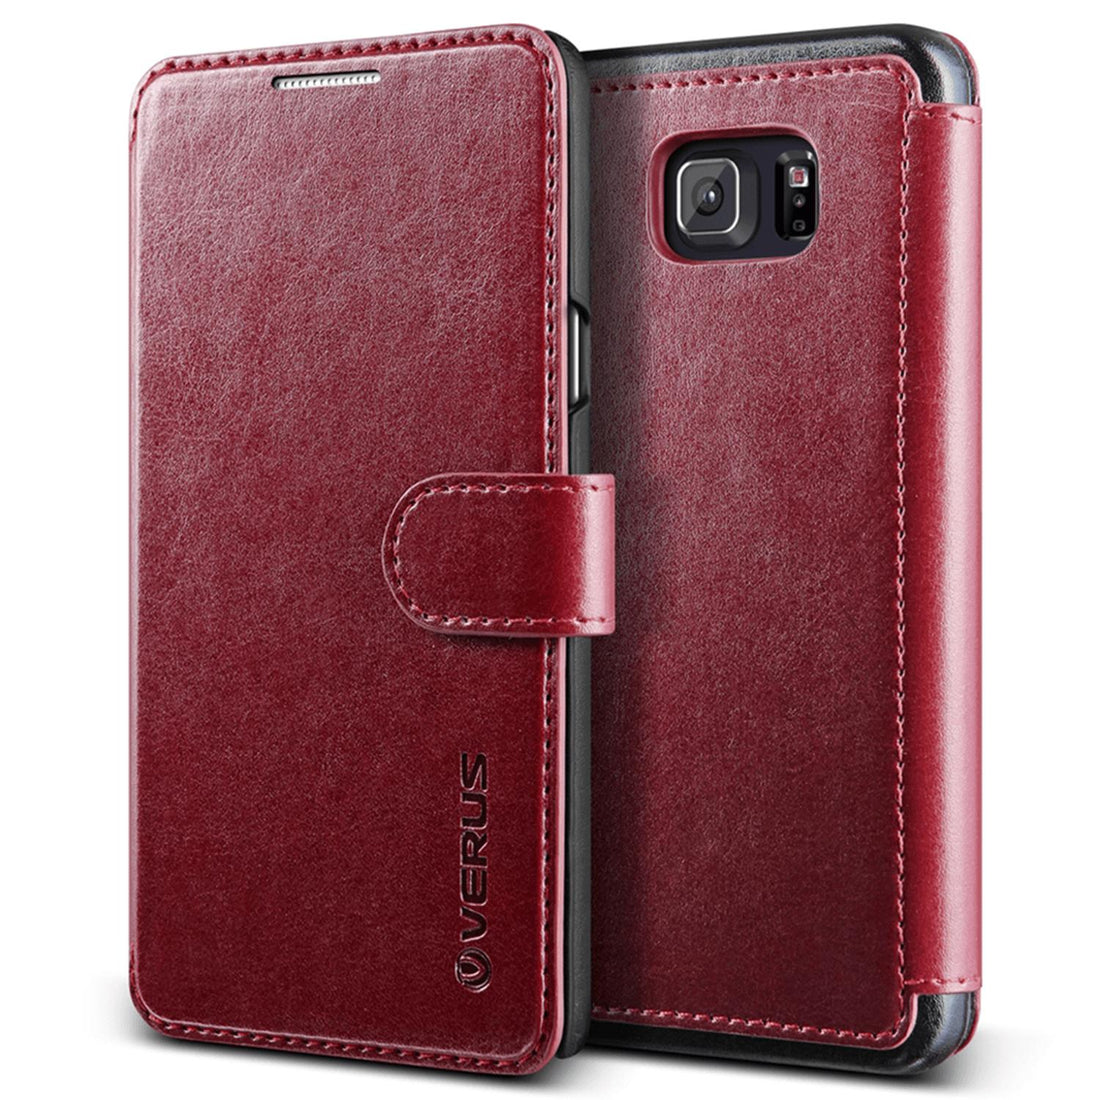 Samsung Galaxy Note 5 Plus wallet rugged case with multiple durable and convenient card slot with sleek minimalism by VRS